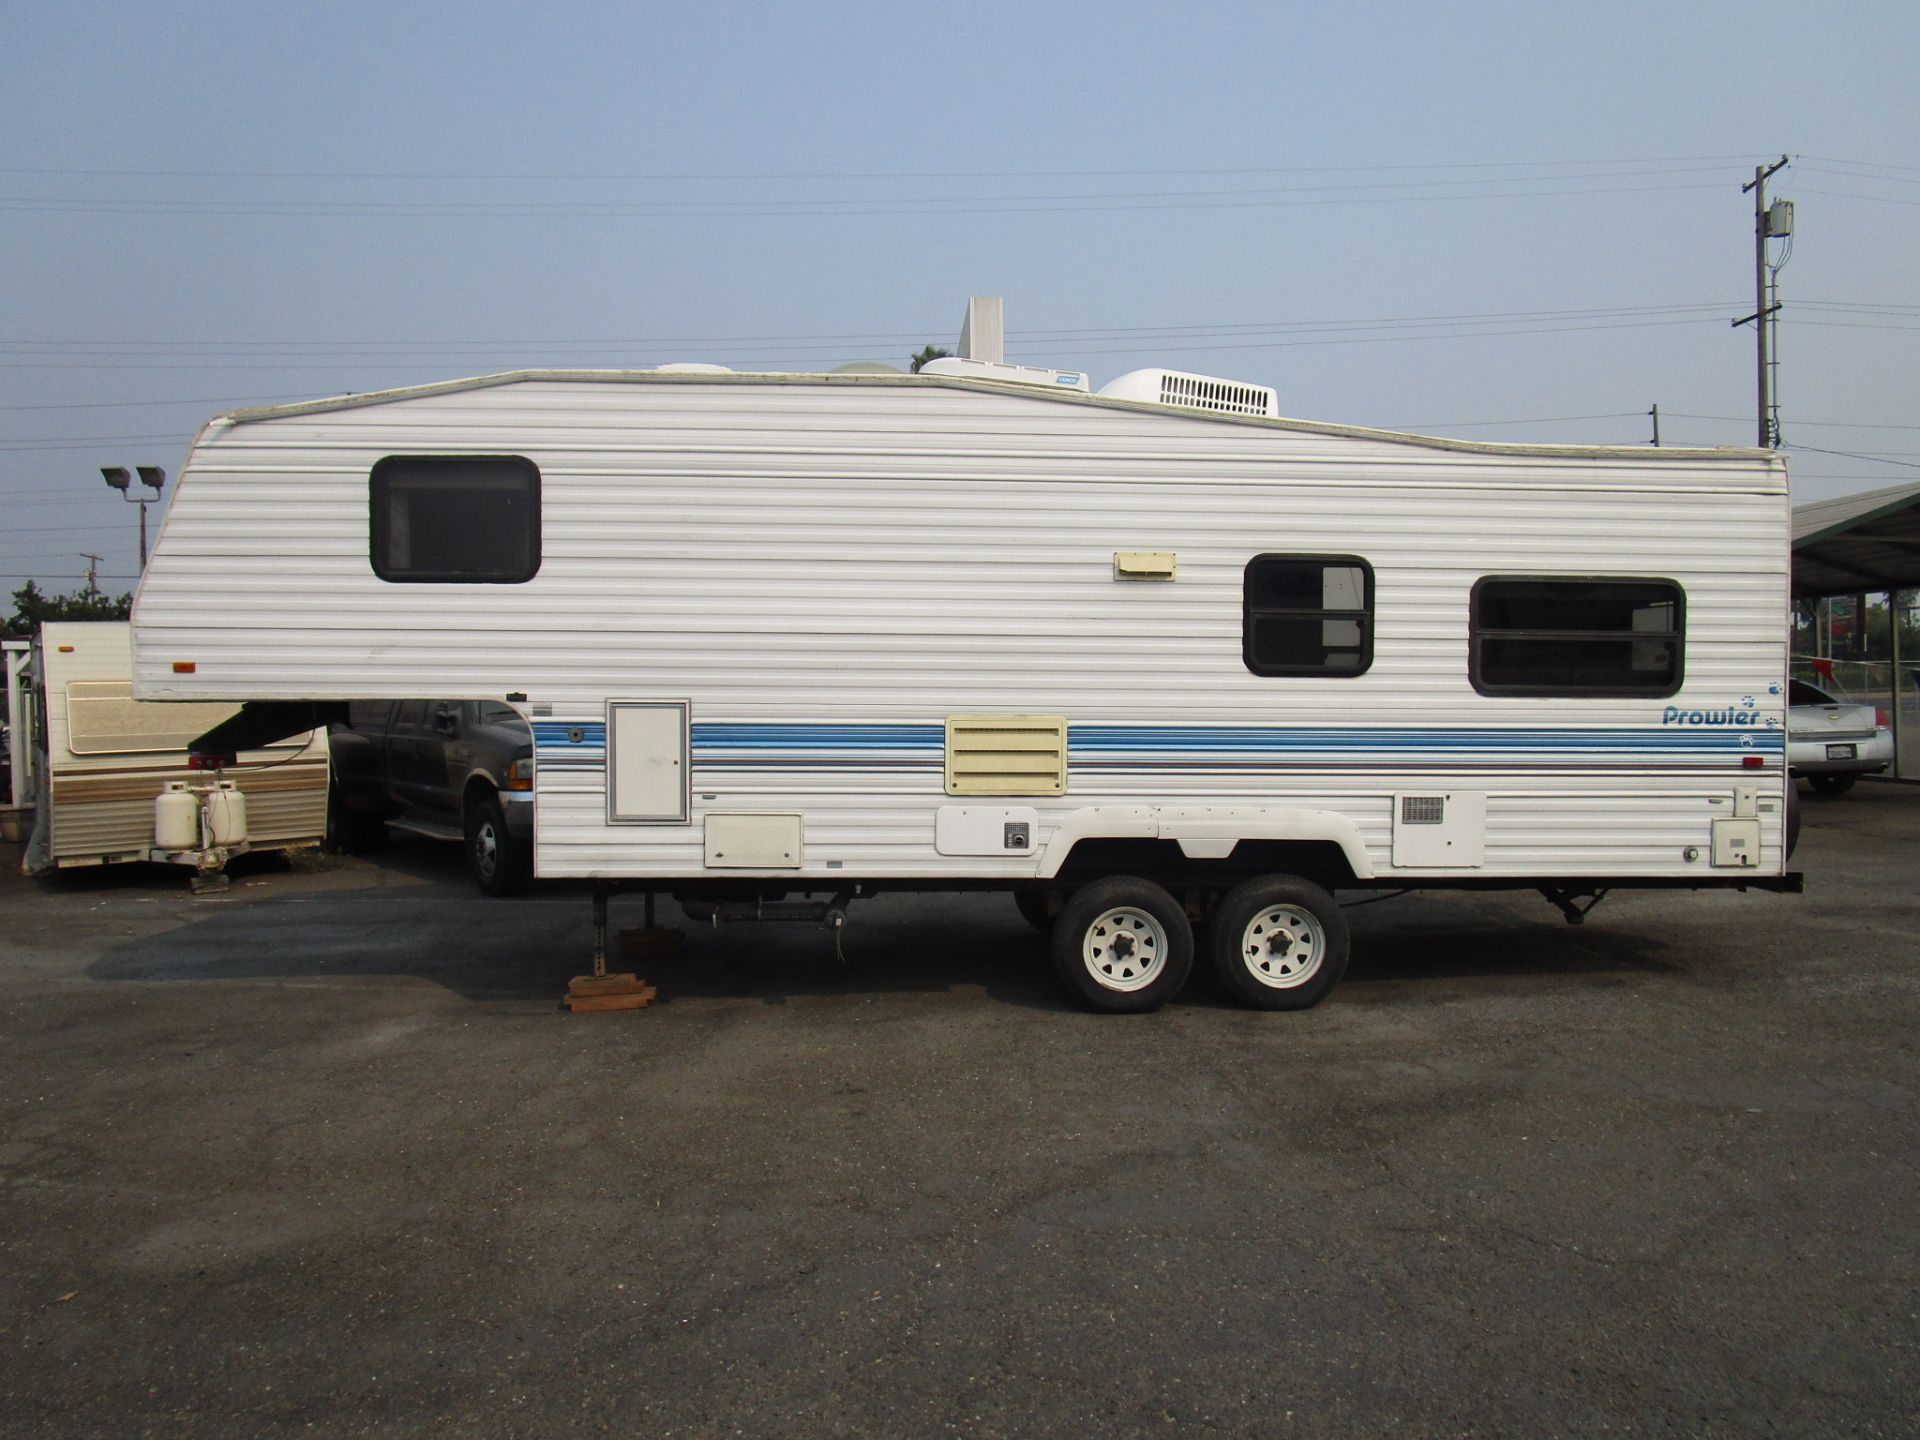 Kelley Blue Book For Travel Trailers 5Th Wheels / Rv Resources Rv Blog Kelley Blue Book For Travel Trailers & 5th Wheels